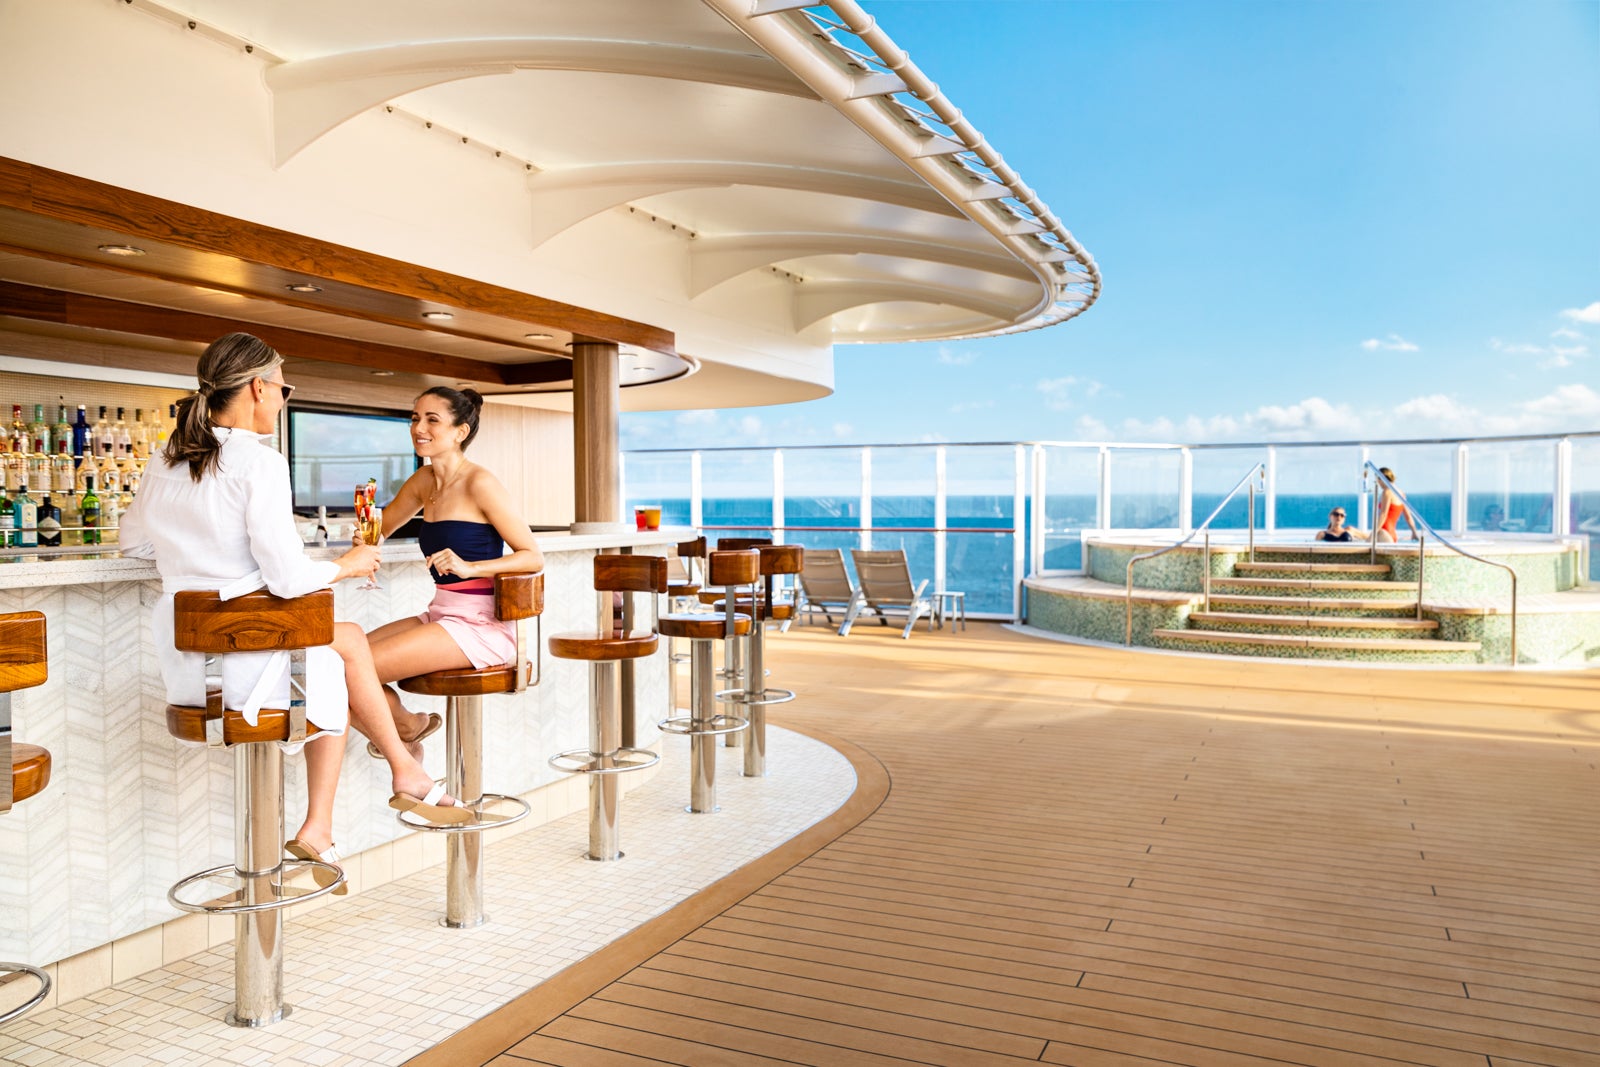 The 1 thing savvy cruisers do to save more on their next cruise